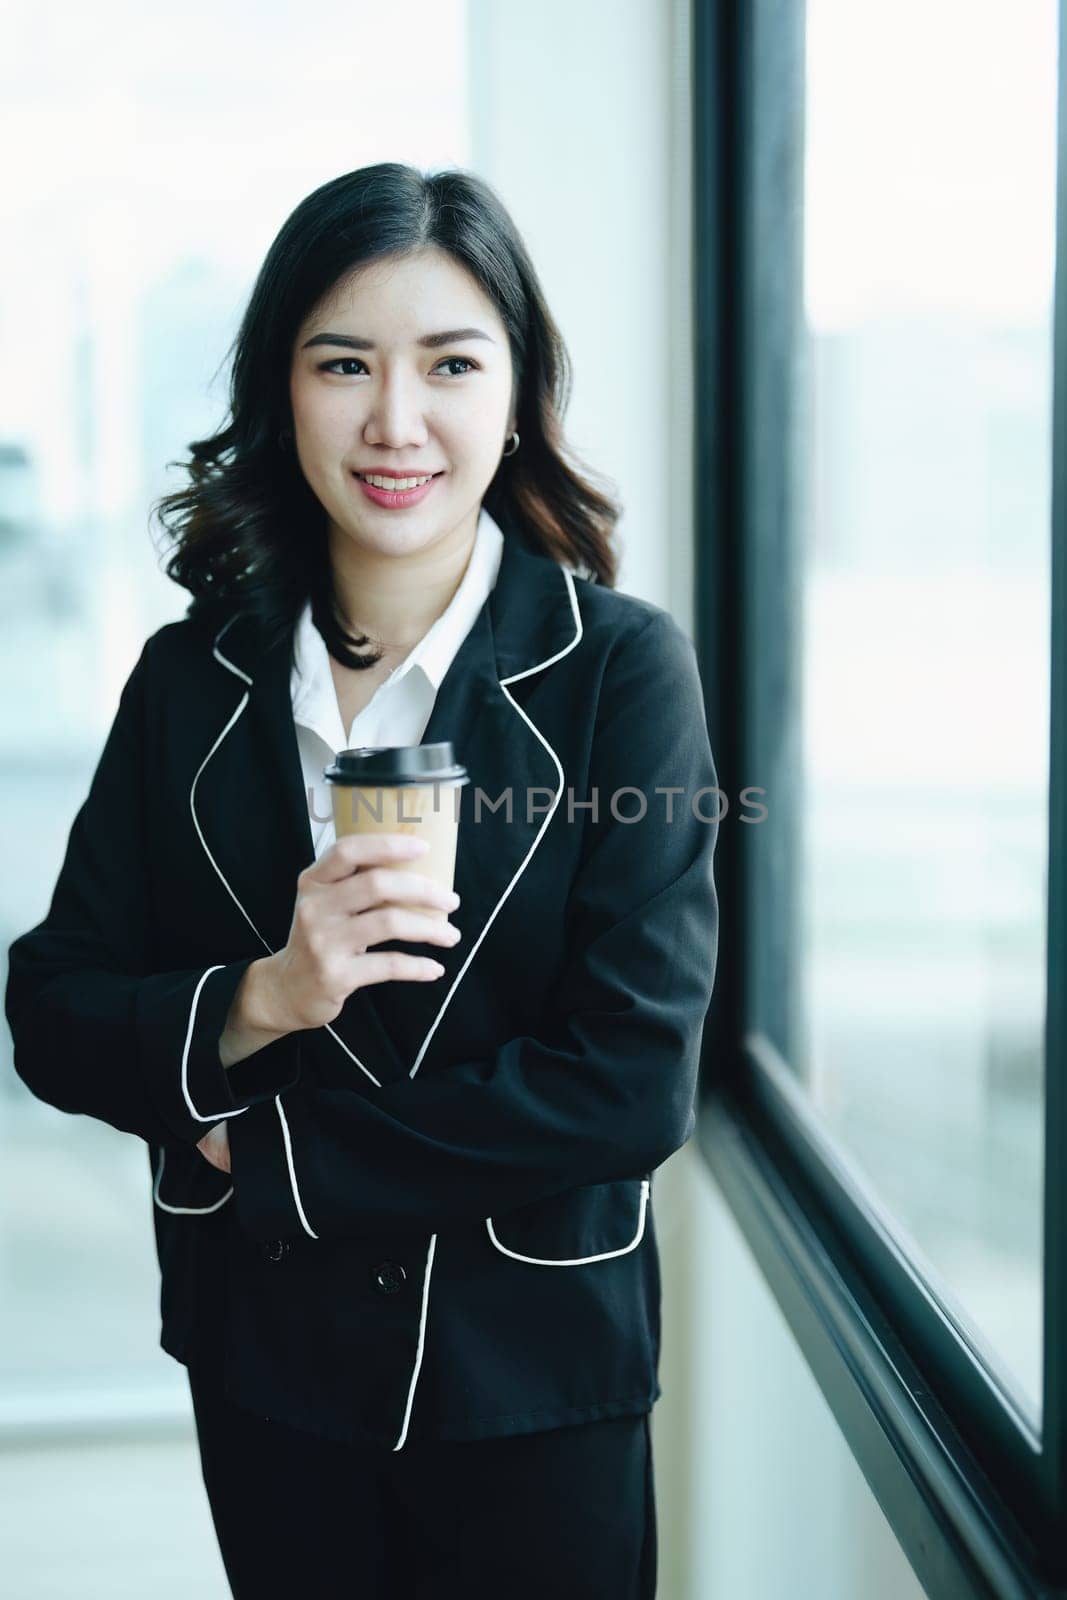 A portrait of a young Asian businesswoman smiling happily and drinking coffee by the window in the conference room.